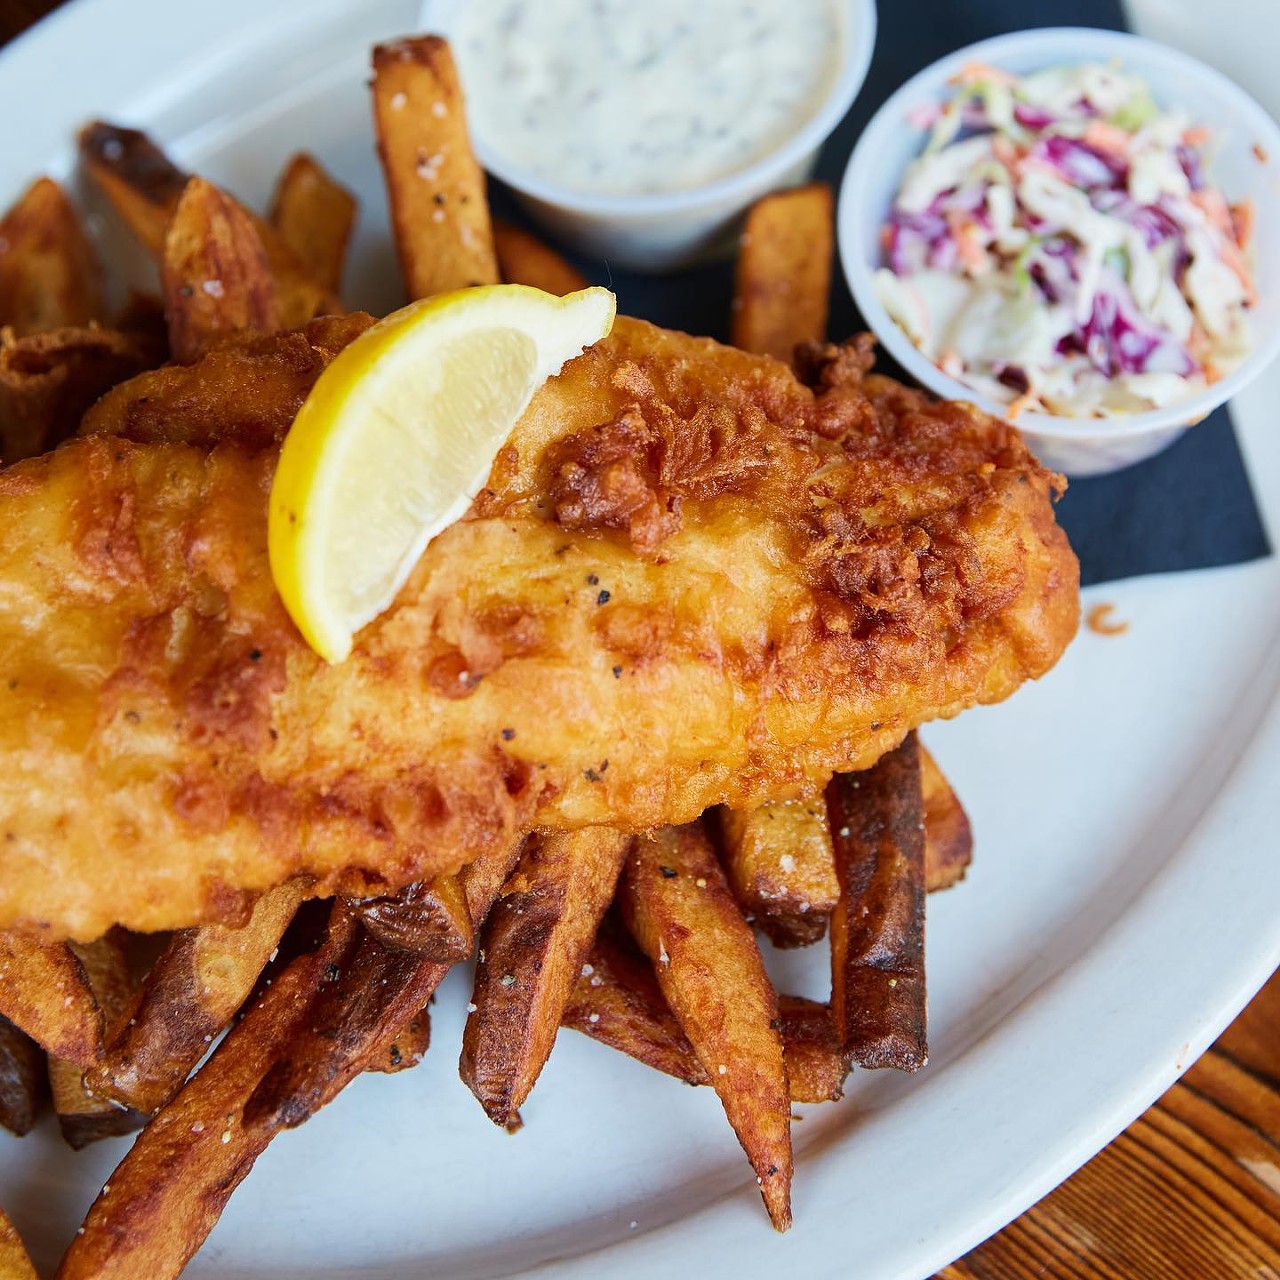 The Pony
Offering a classic fish fry and unique cocktails, The Pony is a great spot for after work on a Friday. The meal is served with french fries and coleslaw all for $14.Noon-10 p.m. Fridays. 1346 Main St., Over-the-Rhine.